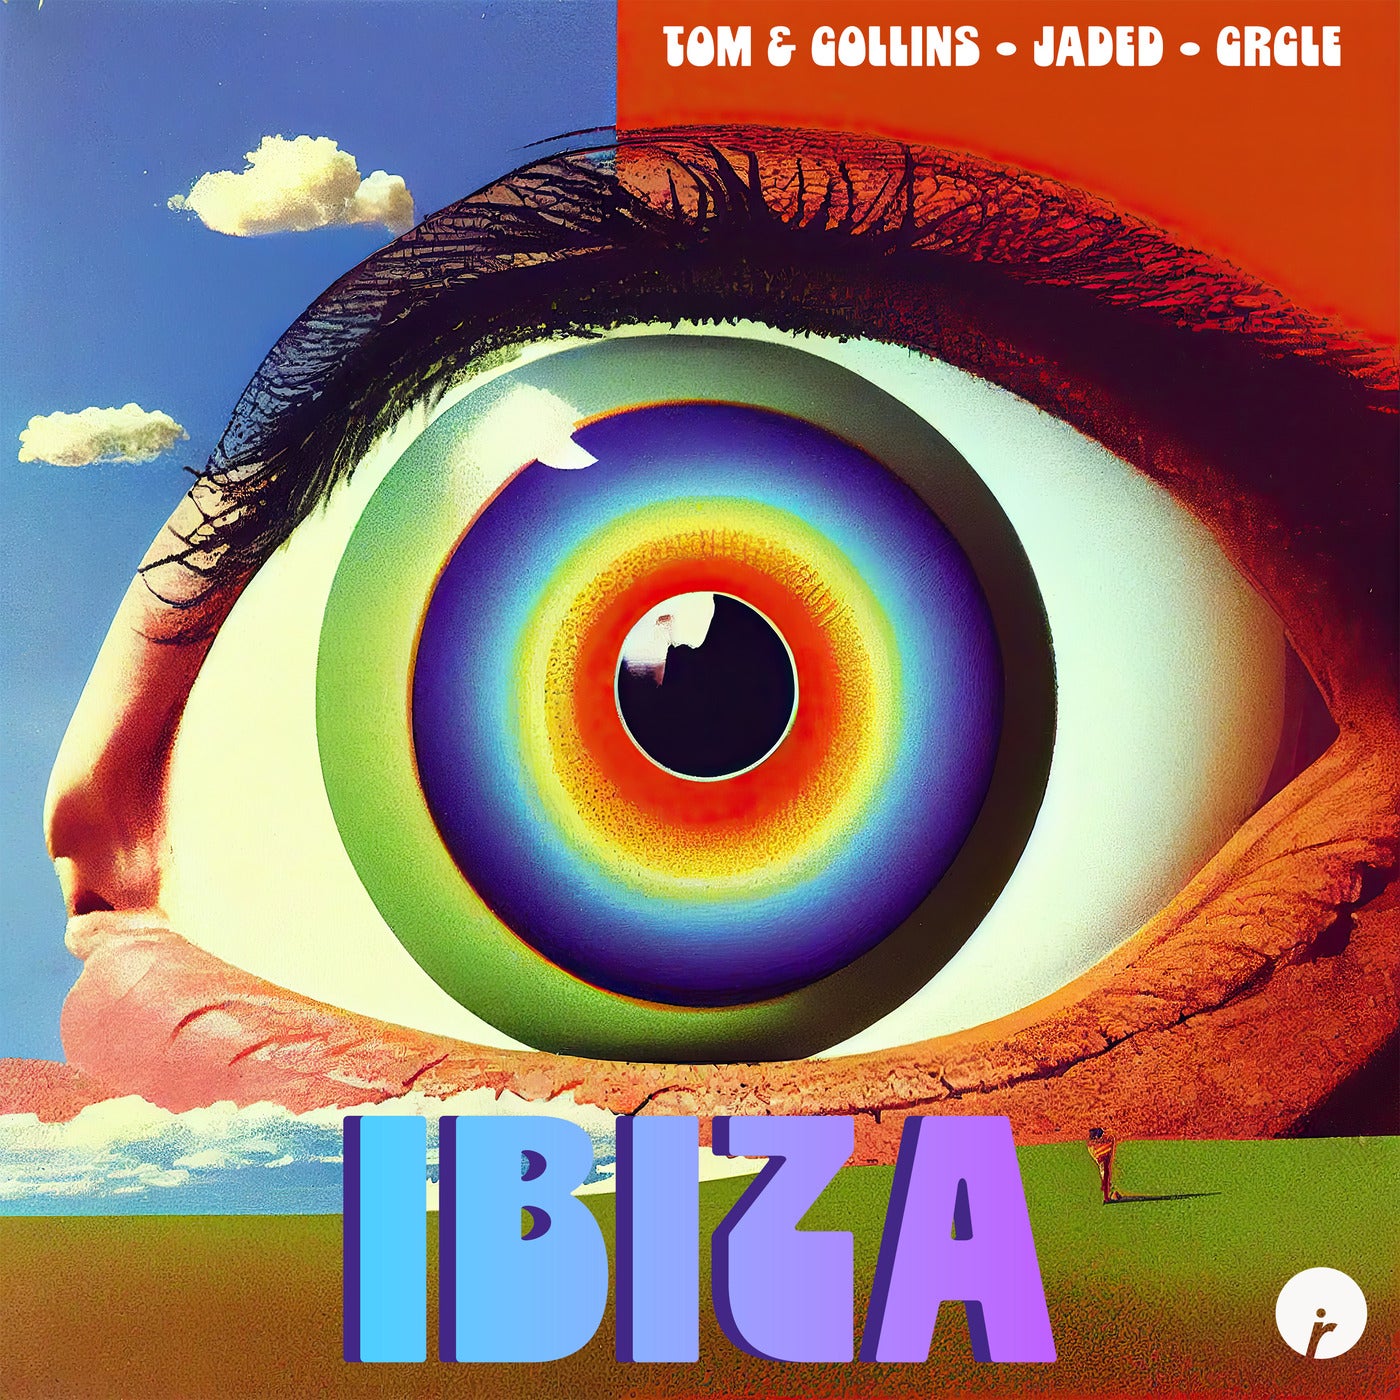 image cover: Jaded, Tom & Collins, CRCLE - IBIZA on Insomniac Records